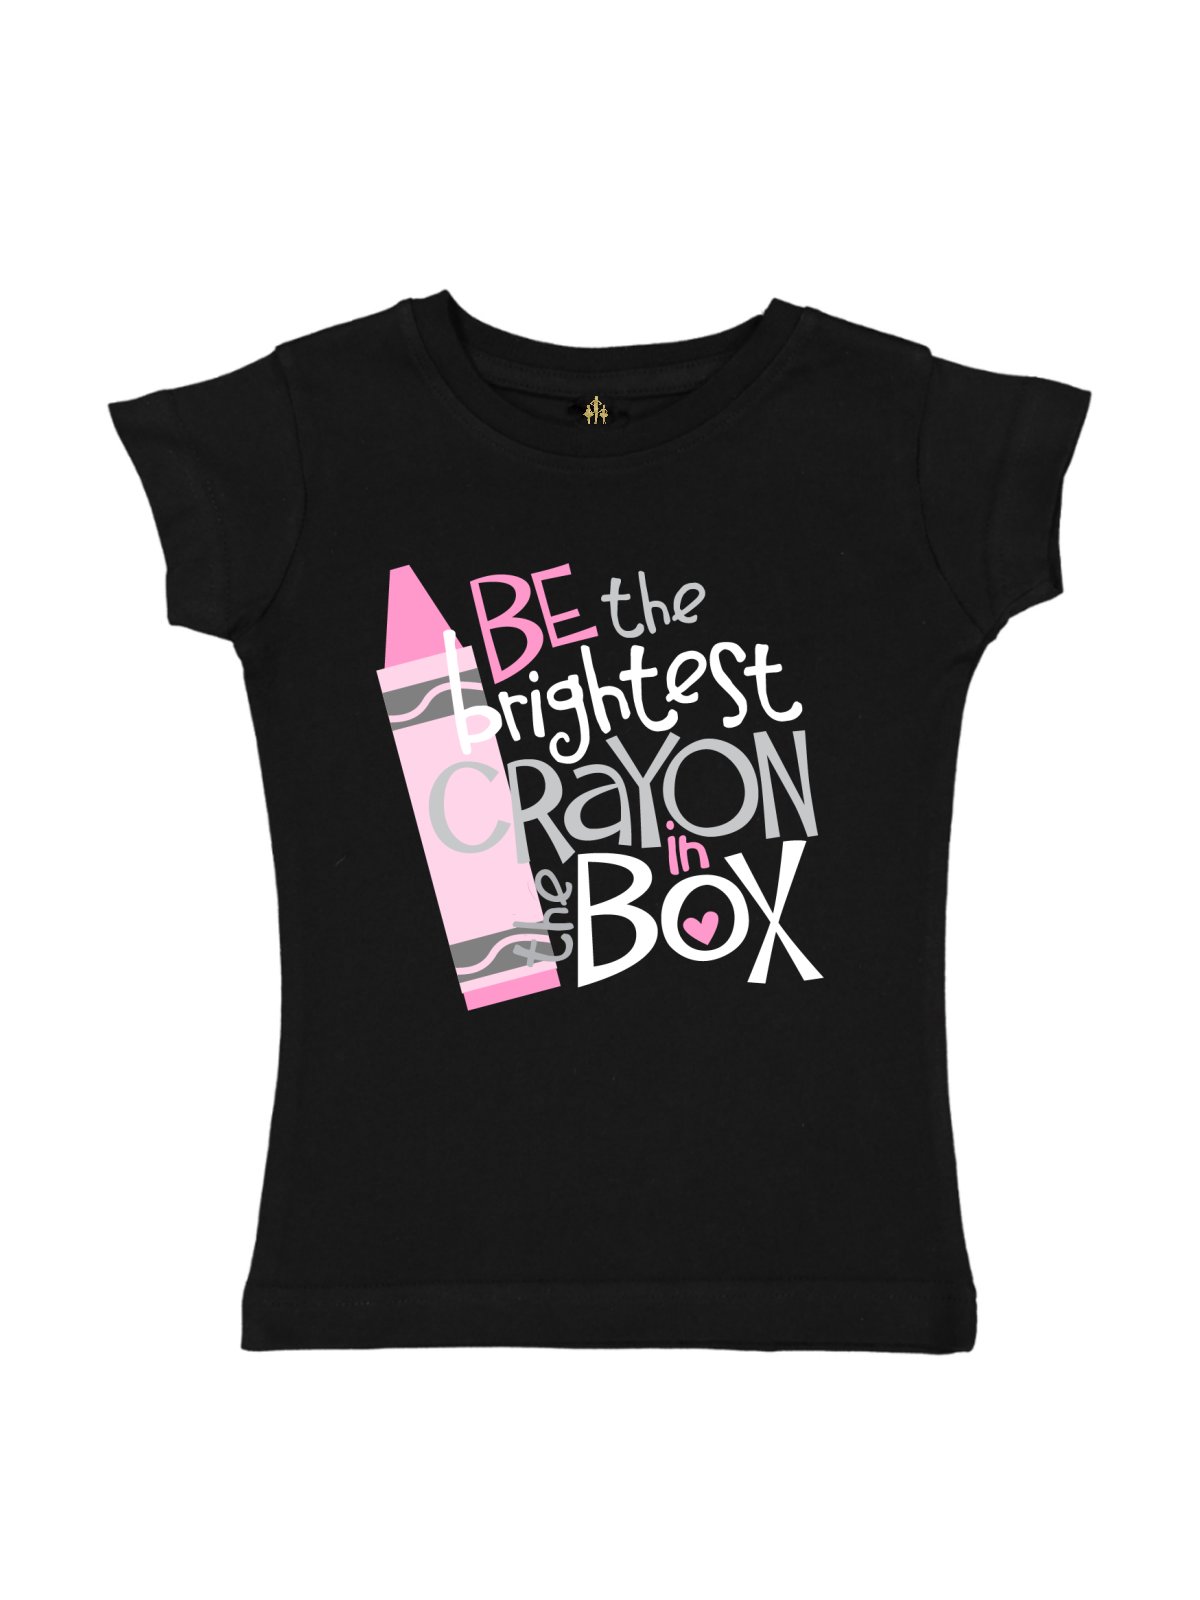 Be the Brightest Crayon in the Box Girls Shirt in Black